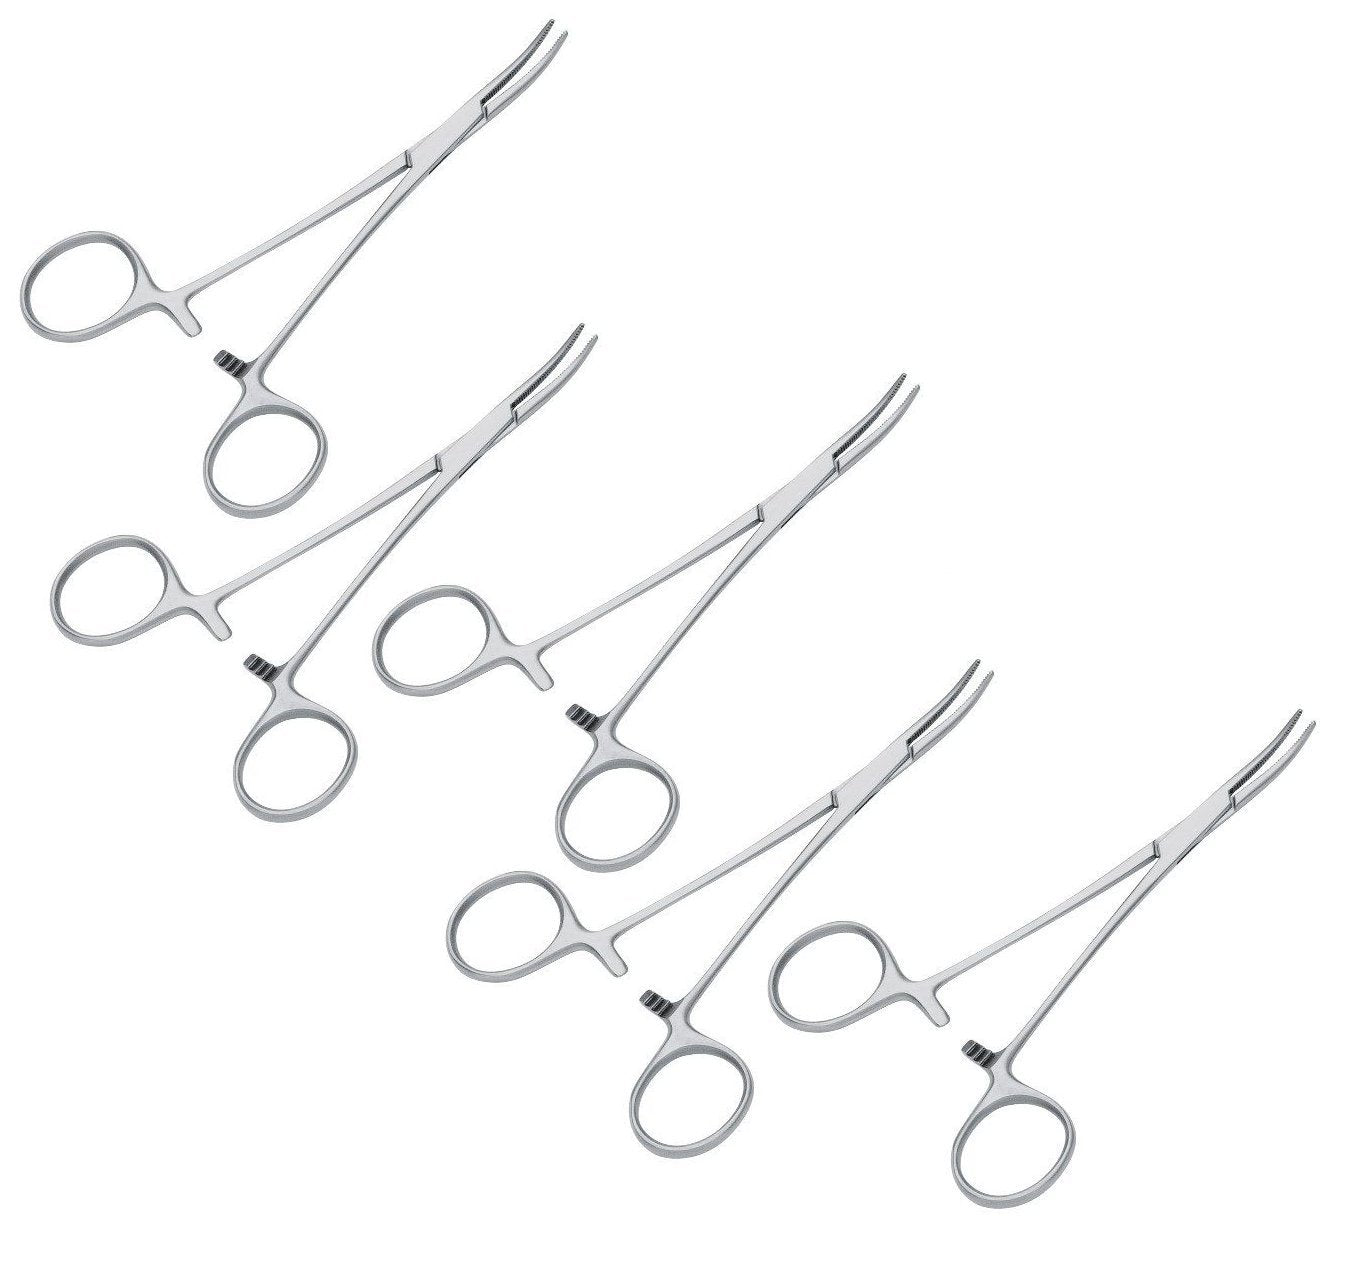 STT 5MOSCV5 Dissecting Mosquito Hemostat Curved Full Serrated Forceps, (12.7cm) 5" L, 5 Piece